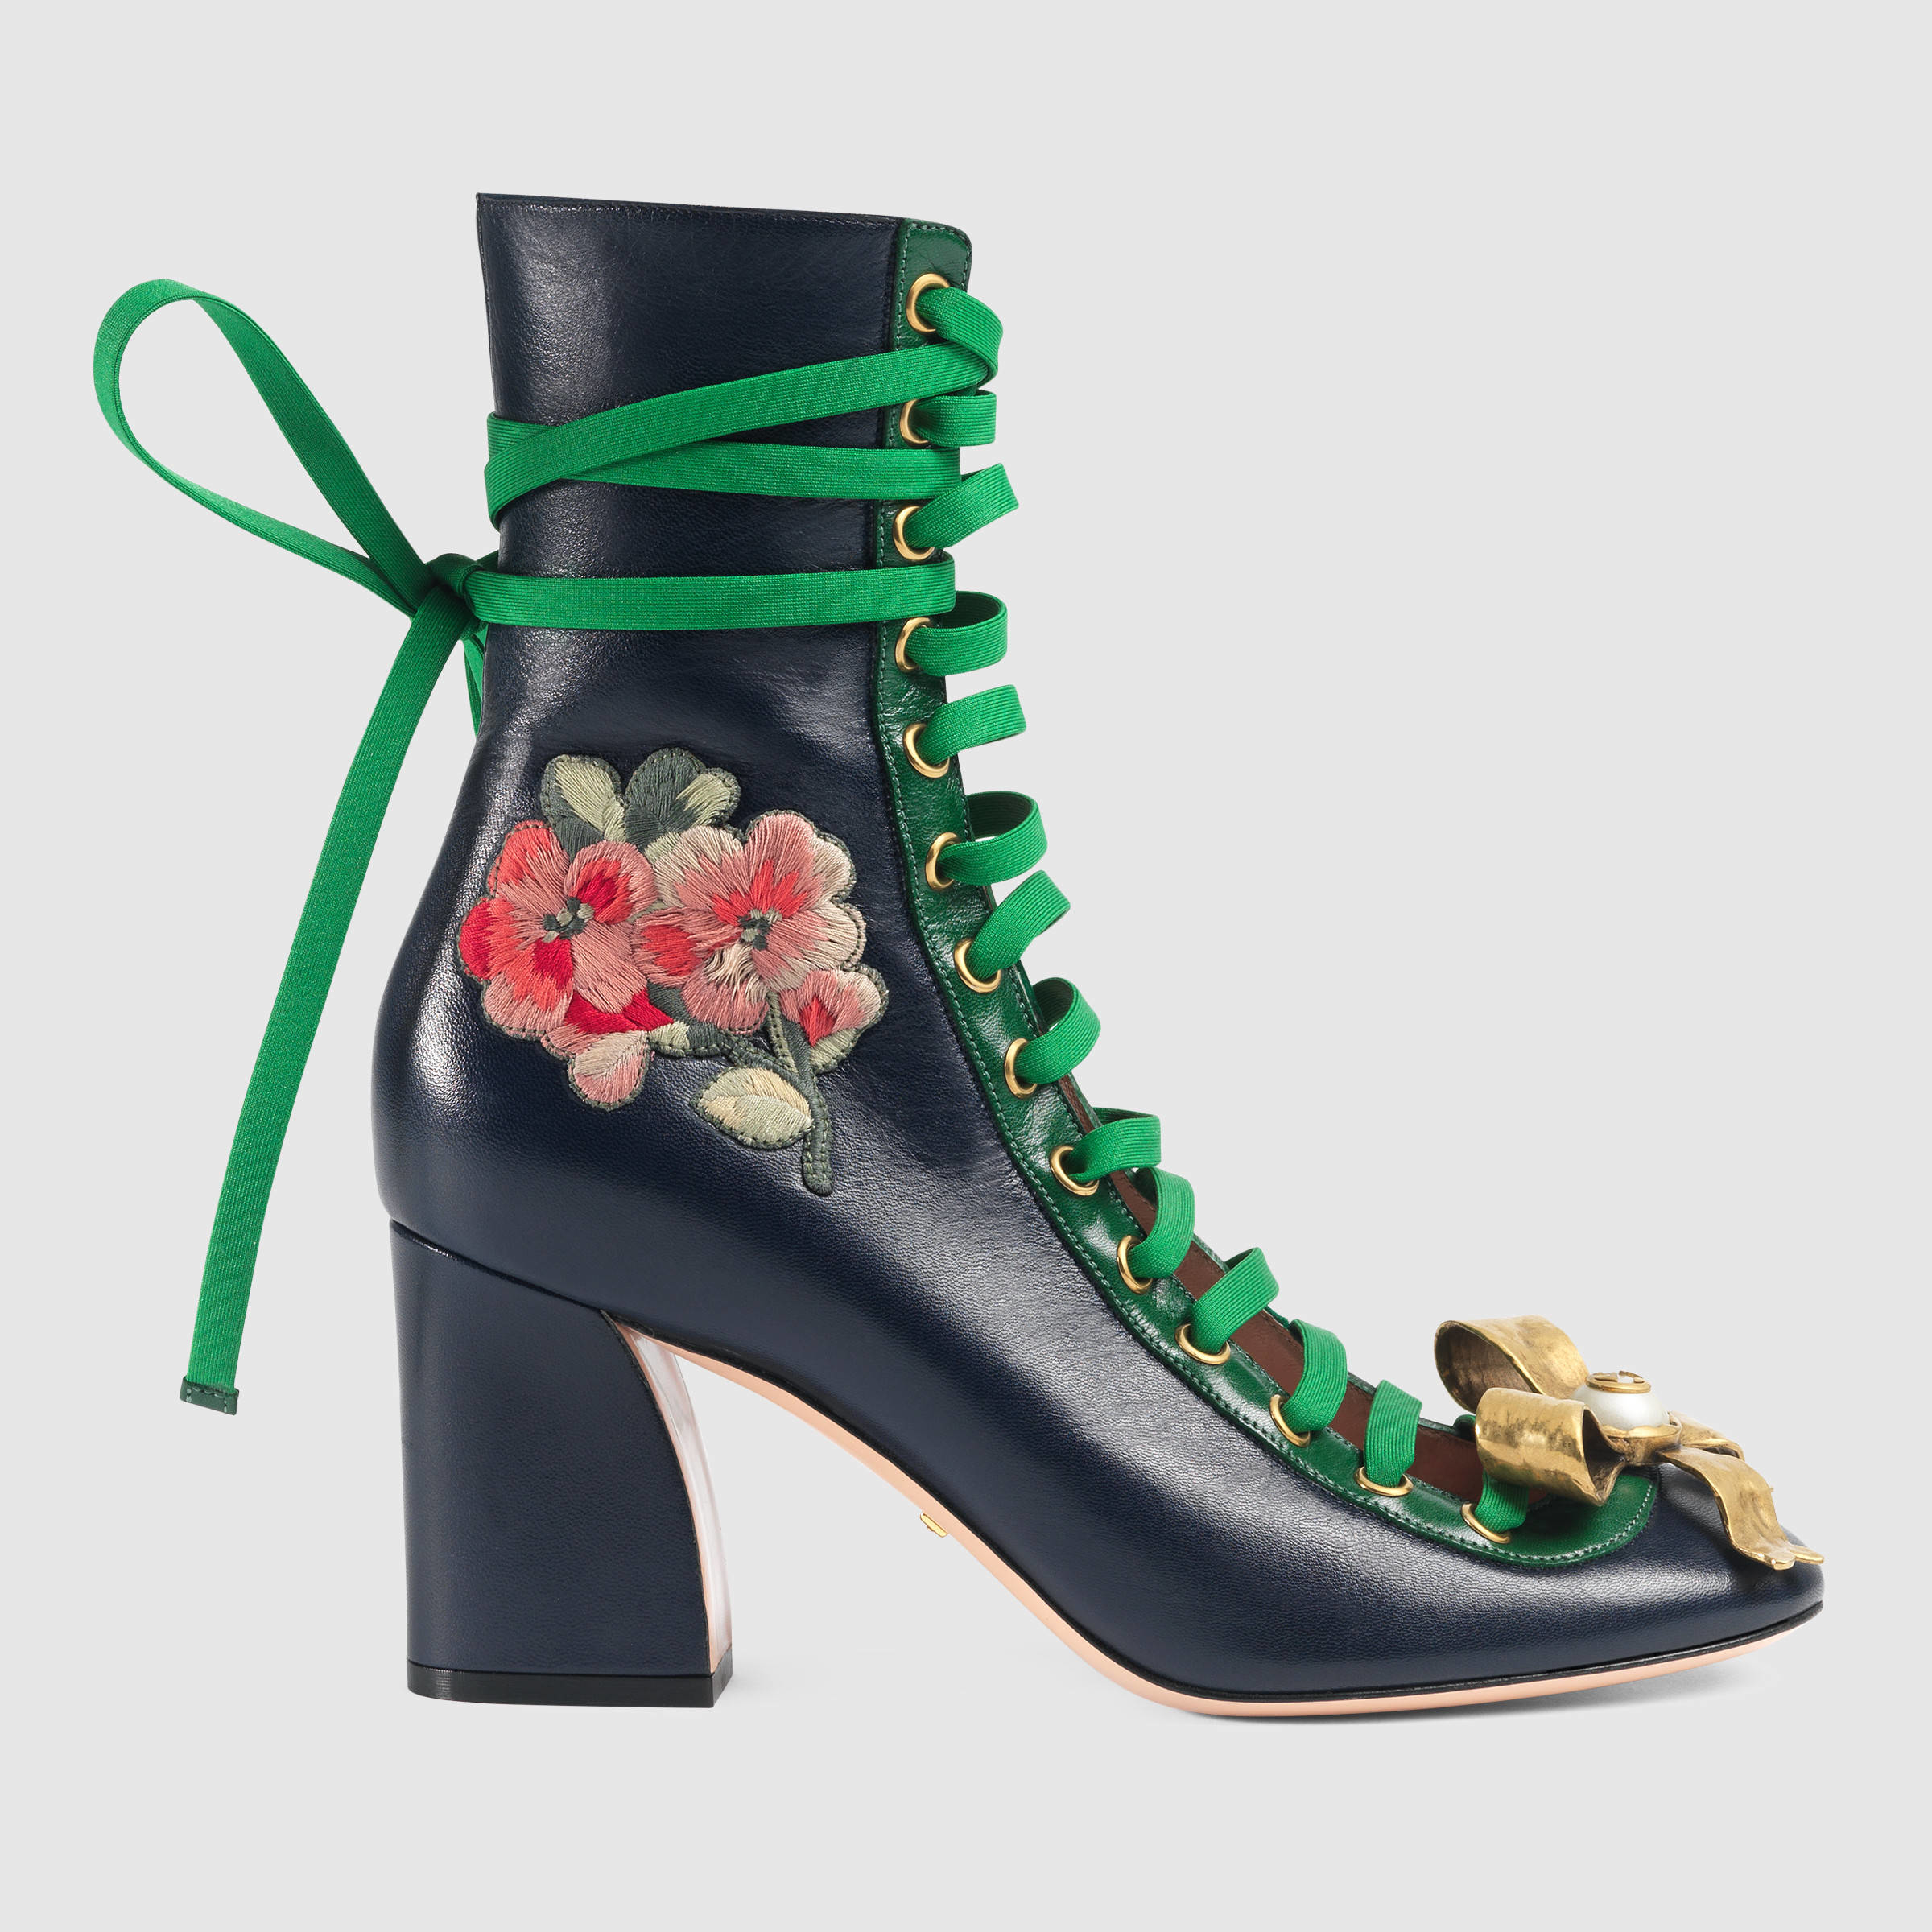 Gucci Finnlay Leather Ankle Boot - Lyst